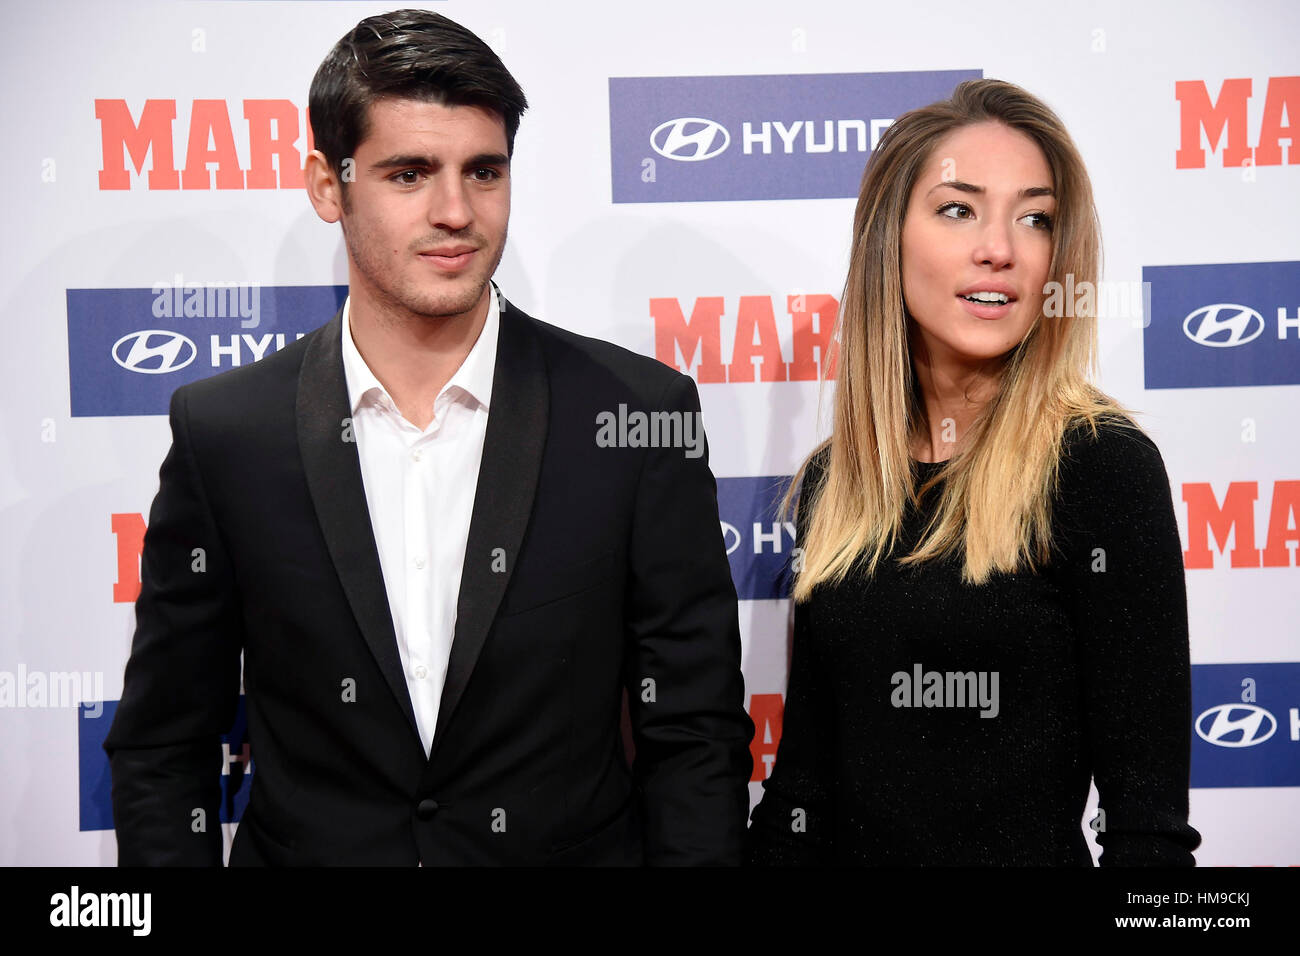 Soccer player Alvaro Morata and girlfriend Alice Campello during awards for  football "Marca" of the Spanish league season 2015-2016 in Madrid on Monday  07 November 2016 Stock Photo - Alamy